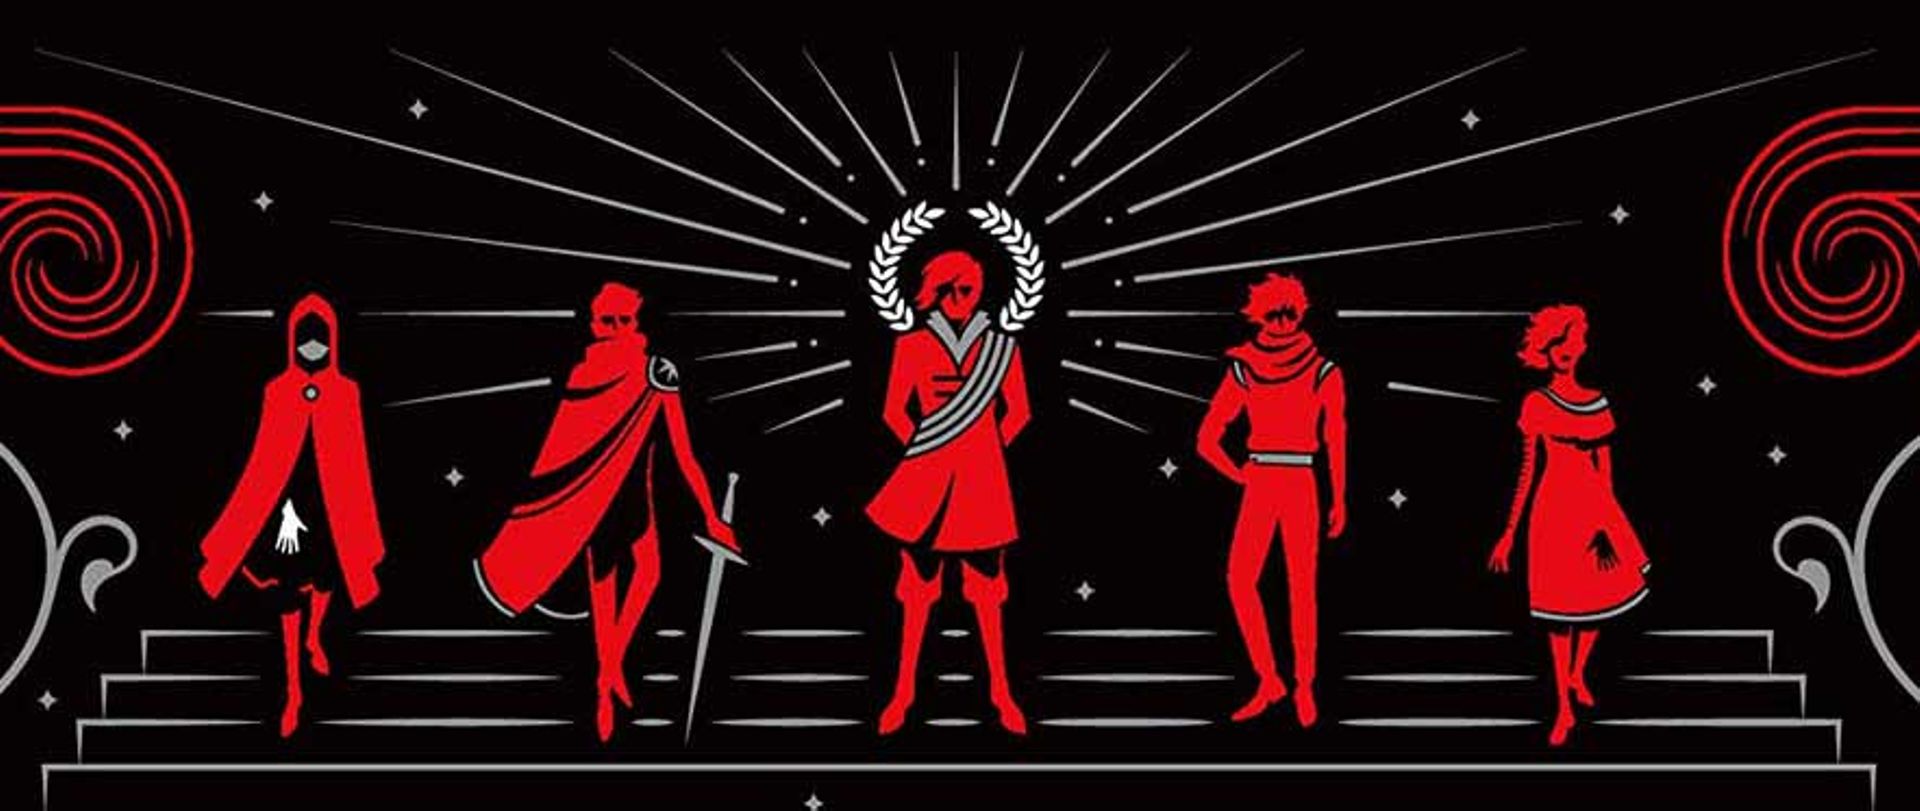 Red silhouettes of the Throne of Glass characters, wielding weapons, shine against a black backdrop.